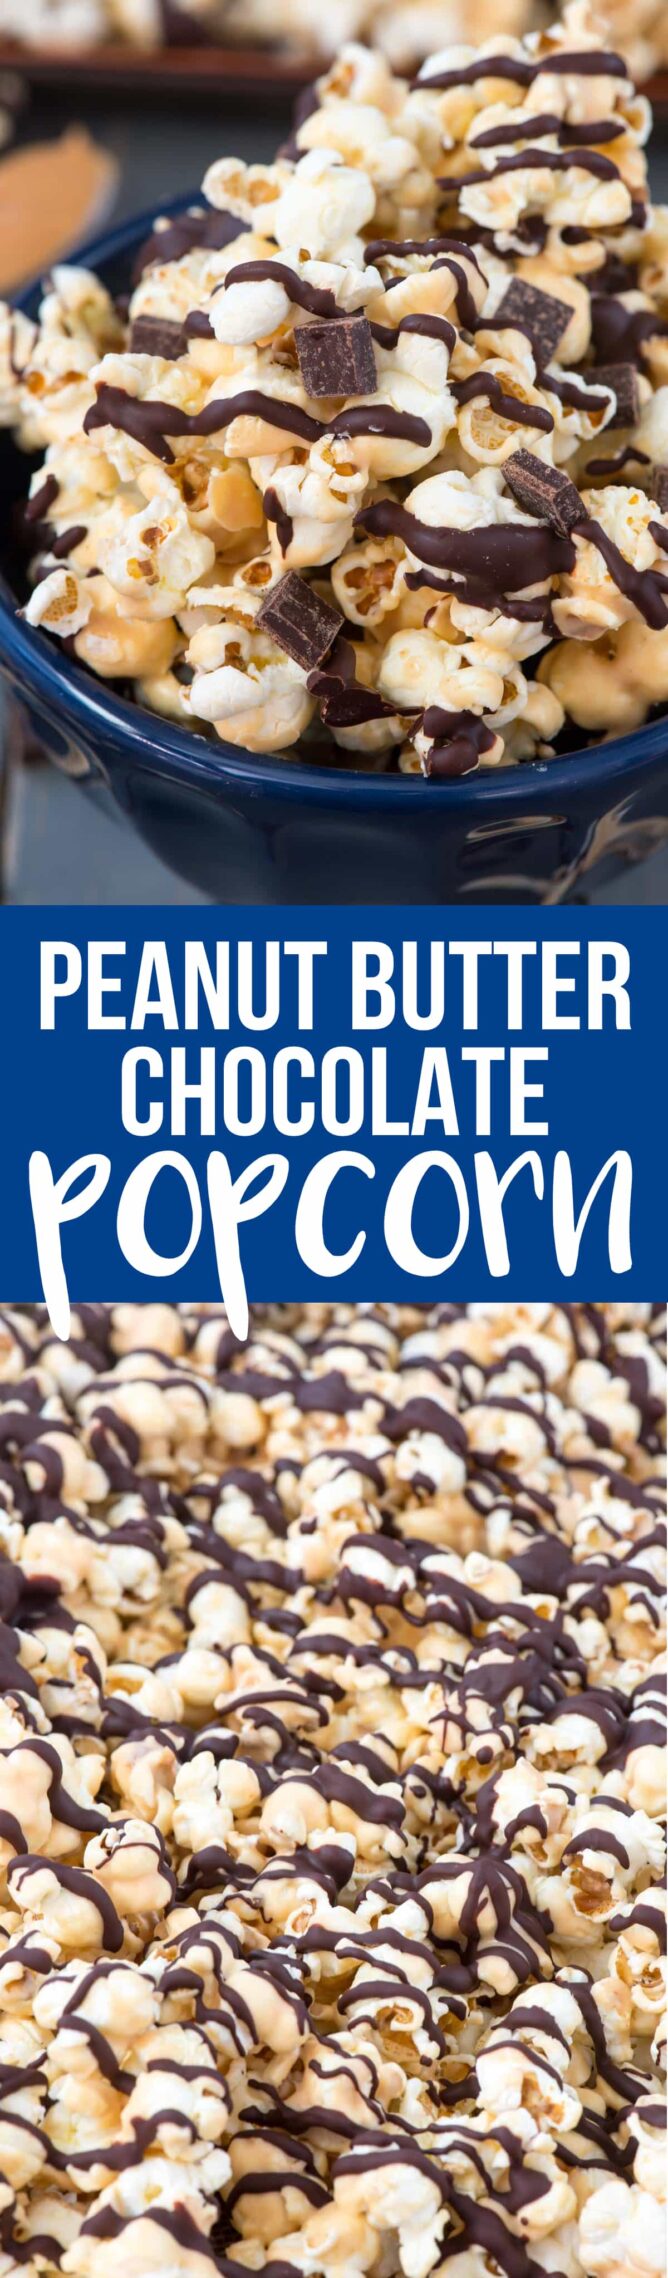 Collage of Chocolate Peanut Butter Popcorn